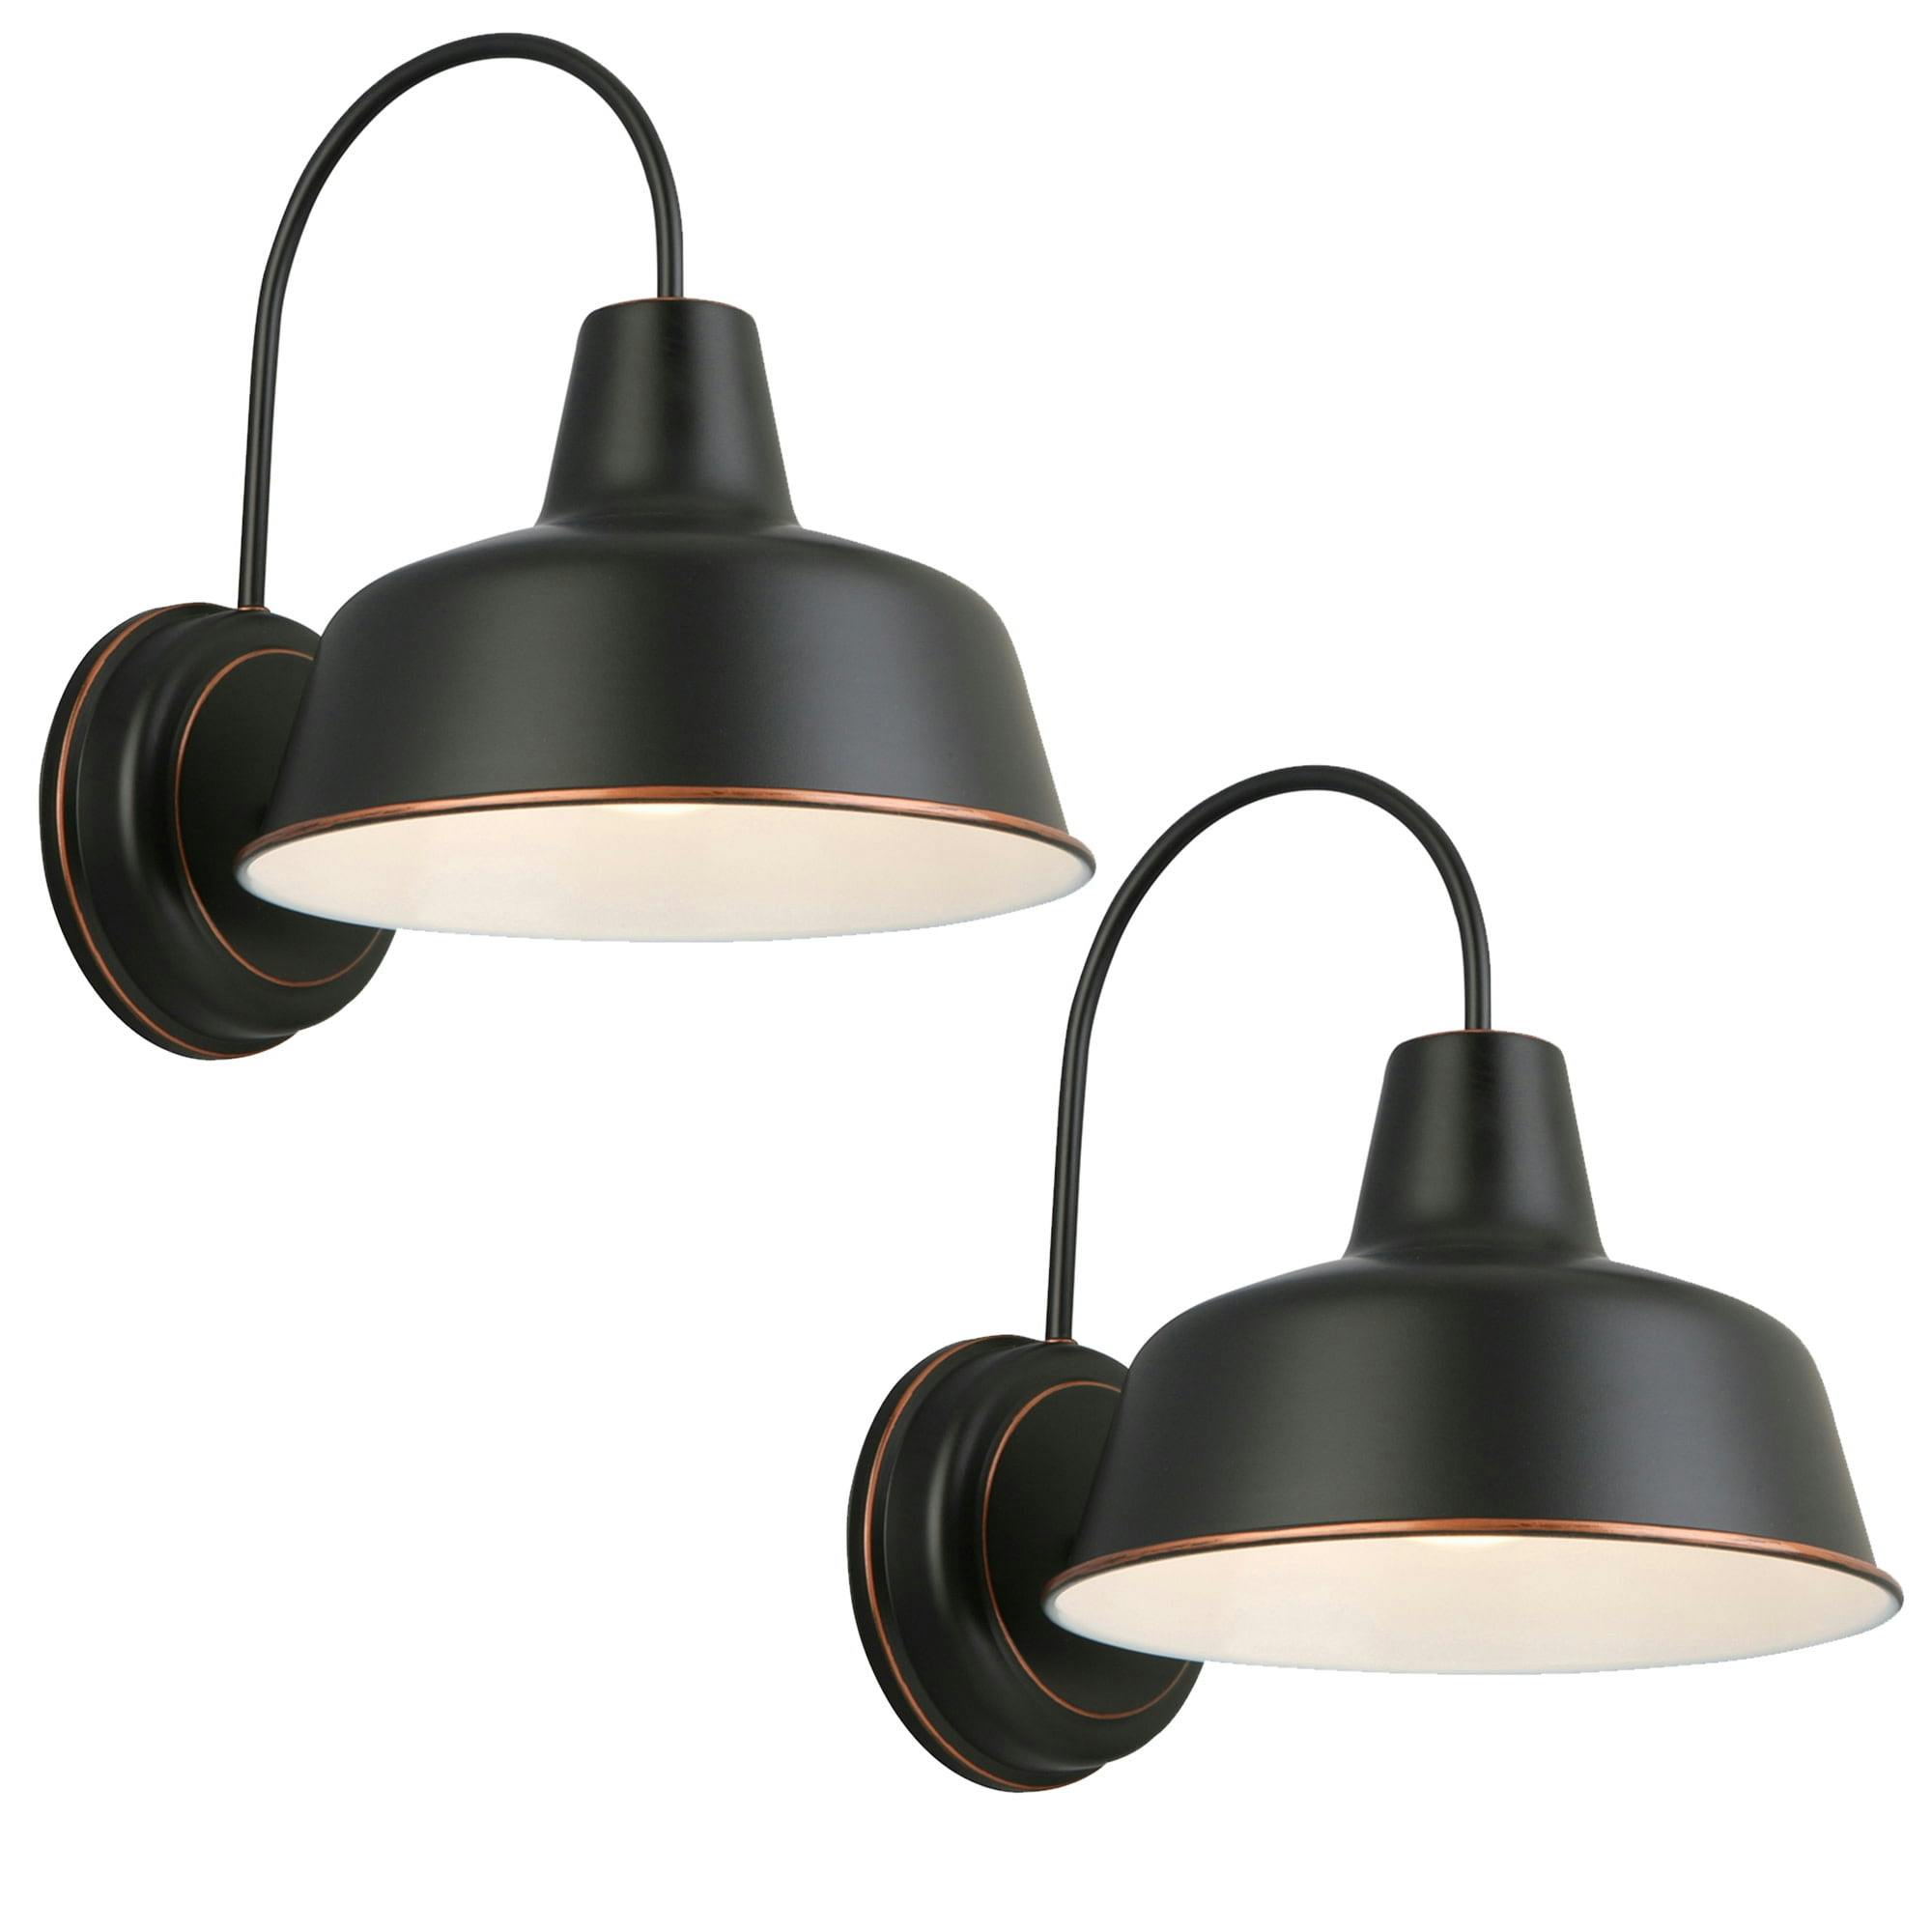 Mason 11" Tall Oil-Rubbed Bronze Steel Outdoor Wall Light, 2-Pack